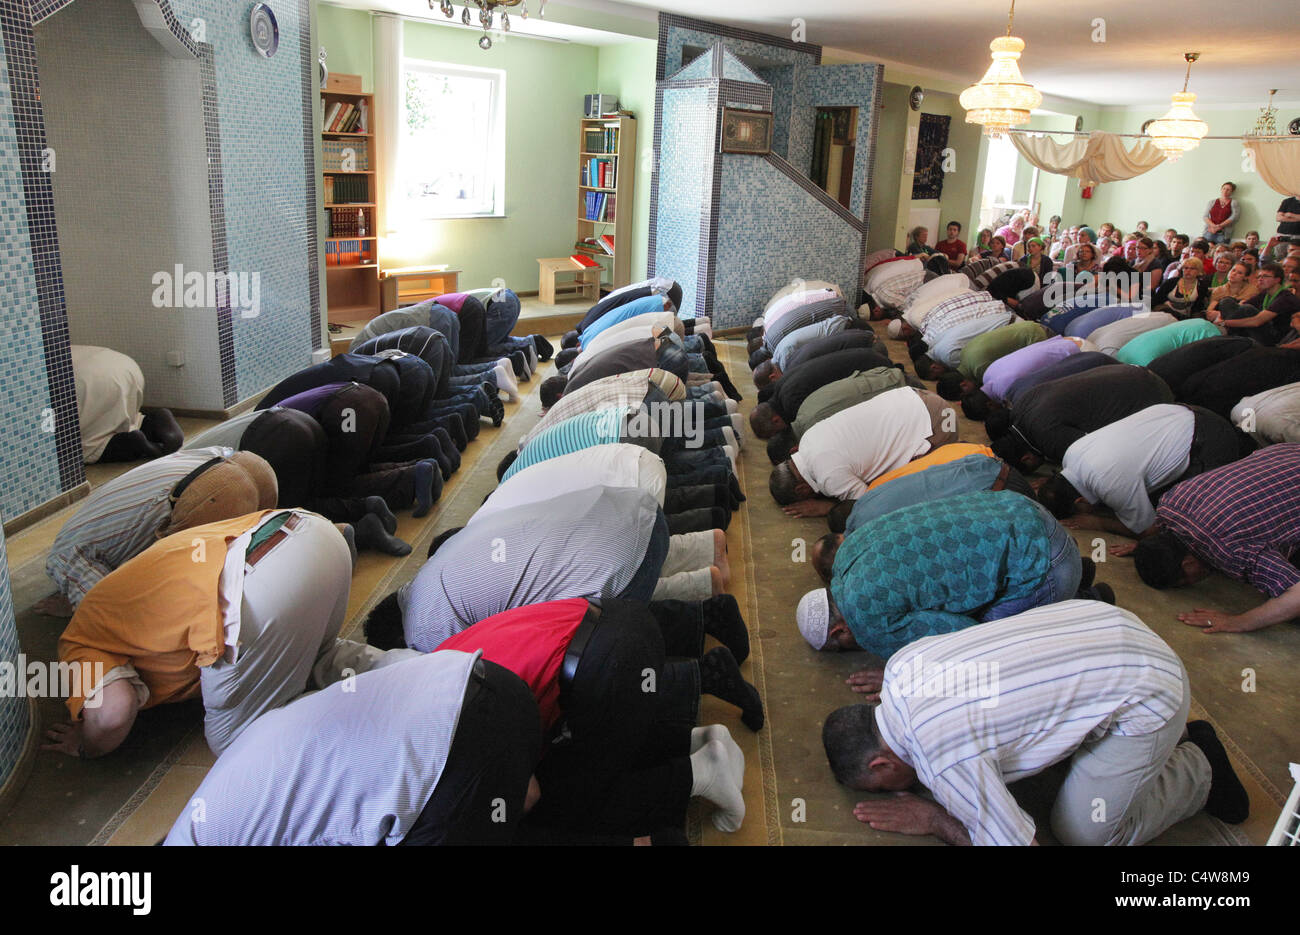 turkish muslims (front) watched by german christians (back) during a friday prayer in a mosque in Dresden, Germany. Stock Photo